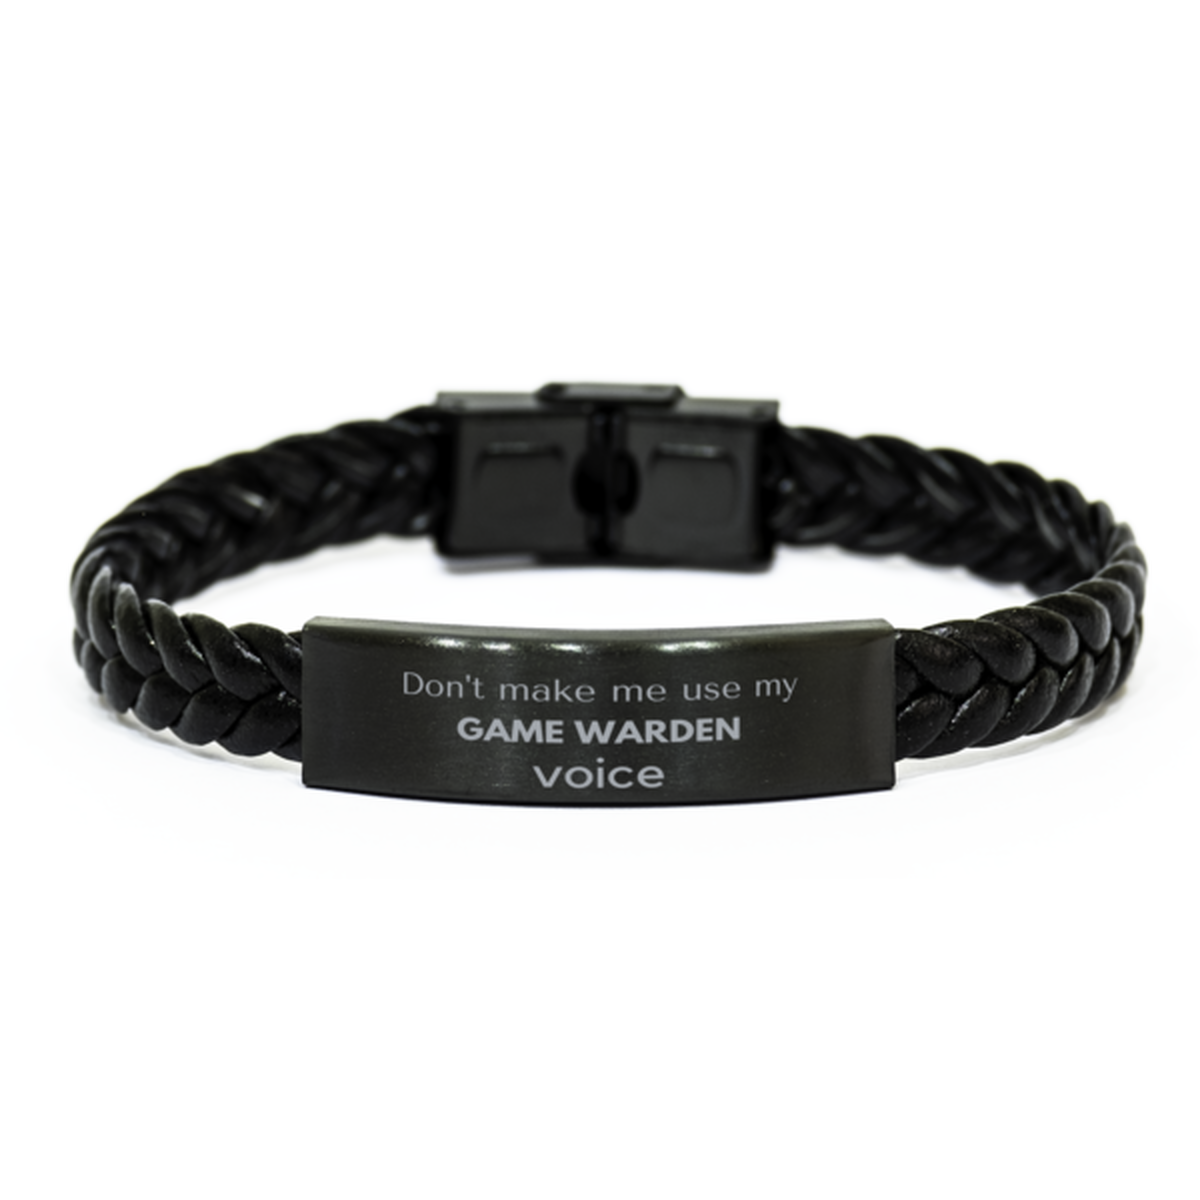 Don't make me use my Game Warden voice, Sarcasm Game Warden Gifts, Christmas Game Warden Braided Leather Bracelet Birthday Unique Gifts For Game Warden Coworkers, Men, Women, Colleague, Friends